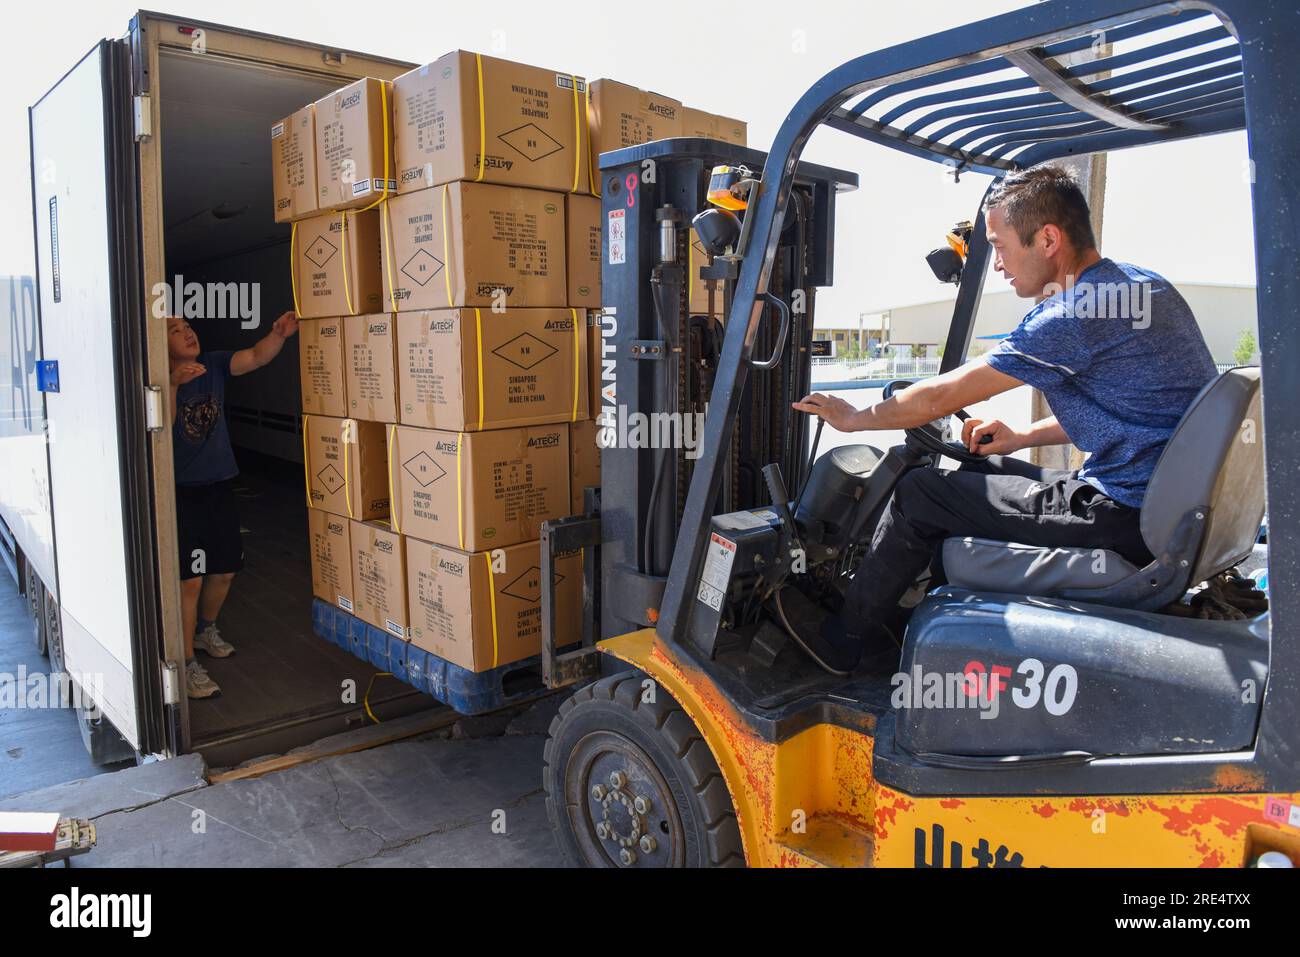 (230725) -- ALATAW PASS, July 25, 2023 (Xinhua) -- Staff members load cargo onto a truck at the custom clearance center for the cross-border e-commerce of the Alataw Pass comprehensive bonded area in northwest China's Xinjiang Uygur Autonomous Region, July 24, 2023. In recent years, various measures have been taken to create a better business environment for cross-border e-commerce enterprises in Alataw Pass. The cross-border e-commerce business was launched in the inland port in northwest China's Xinjiang Uygur Autonomous Region in January 2020. In the first half of this year, more than 14.50 Stock Photo